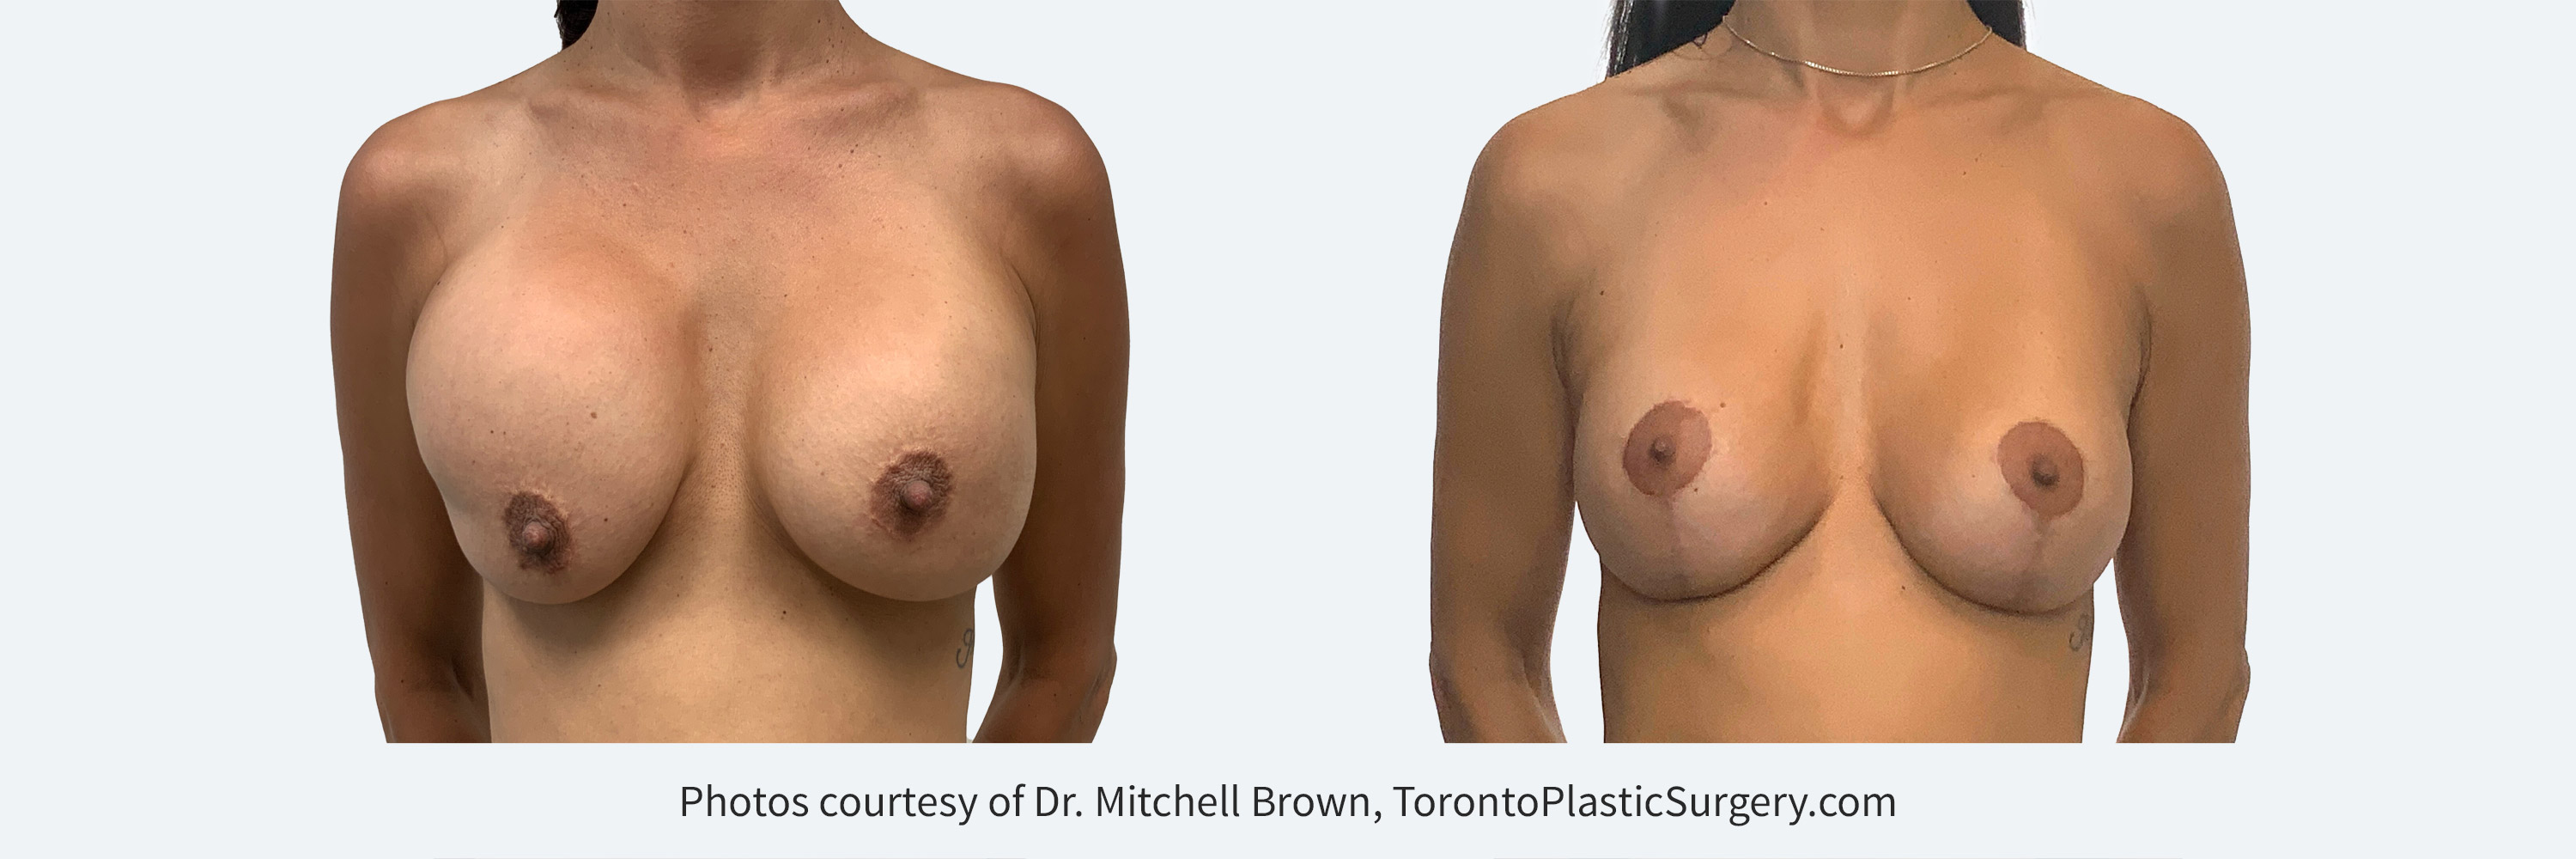 Two previous surgeries with right implant too high under the muscle and left implant contracted. Corrected by repair of each implant pocket, insertion of smaller implants and performing a breast lift. Before and 6 months after.